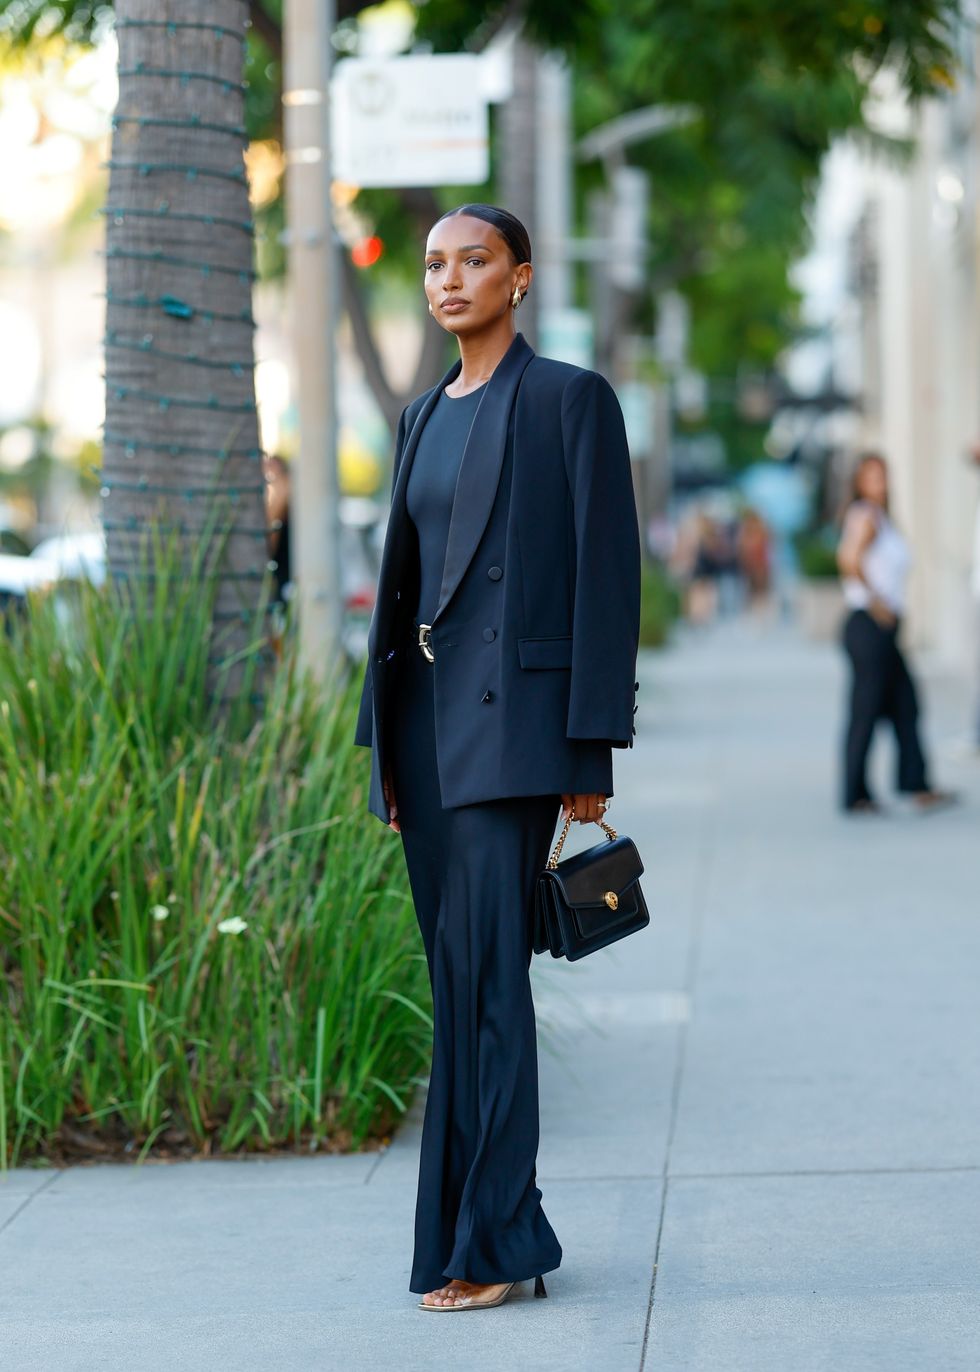 Jasmine-Tookes-stands-outside-wearing-a-structured-blazer